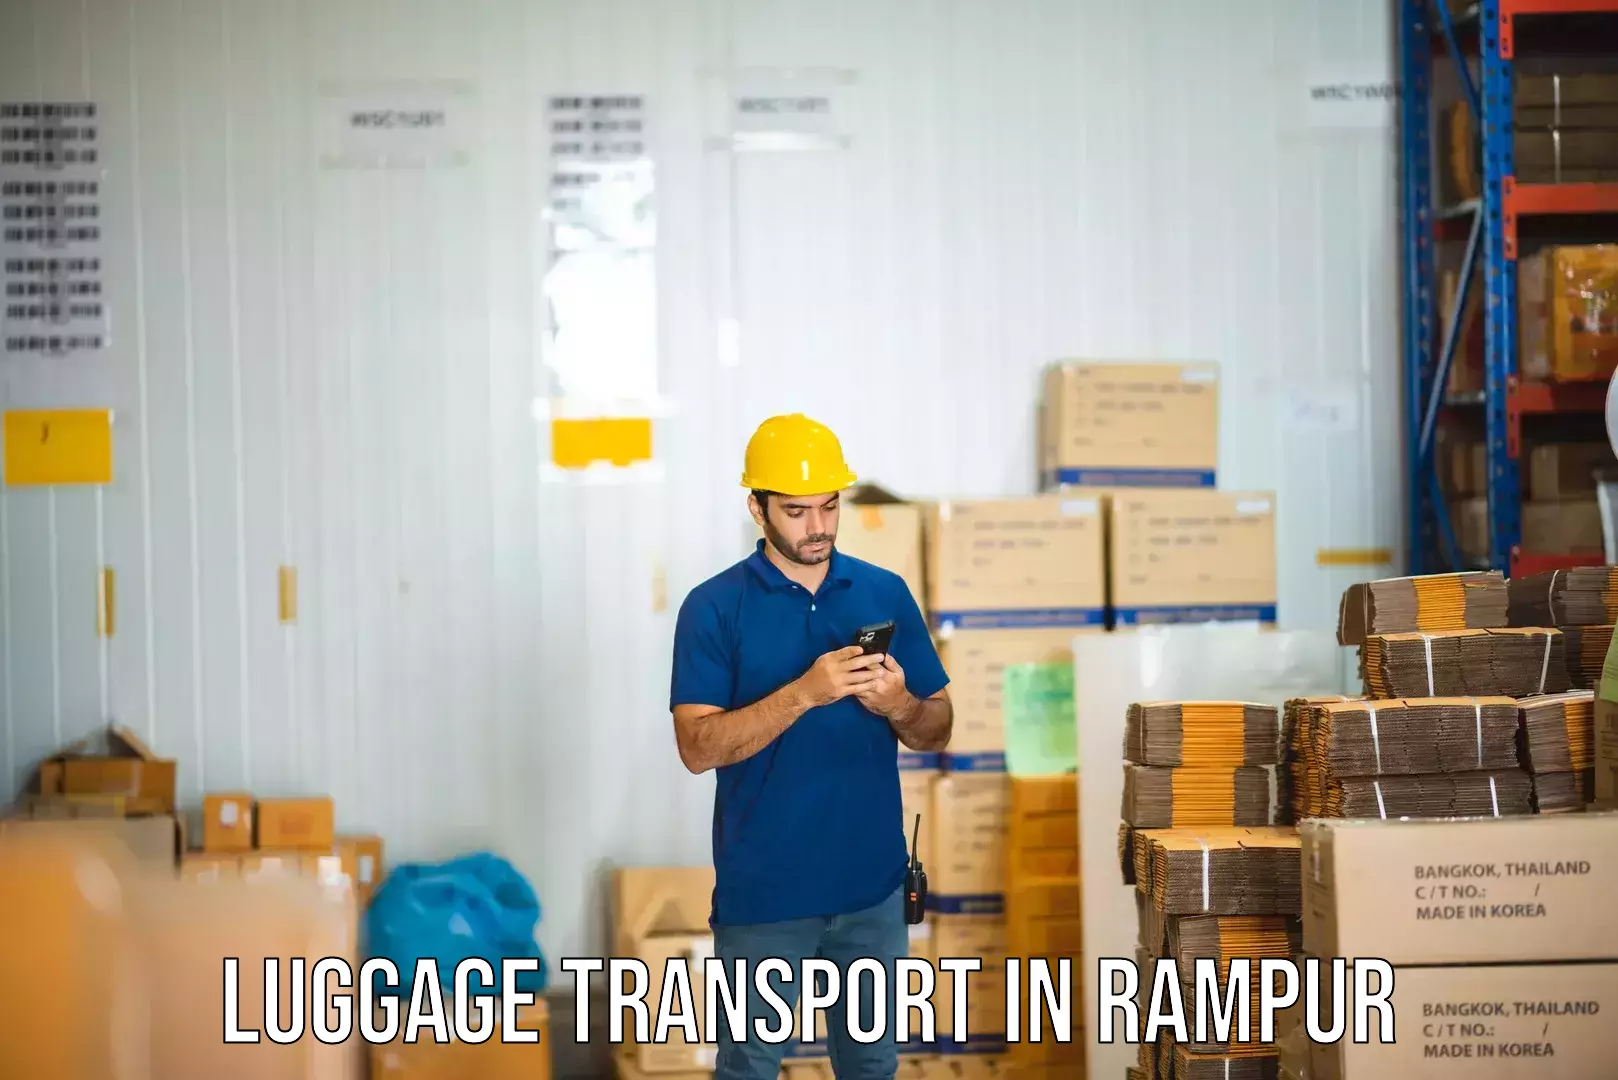 Discounted baggage transport in Rampur